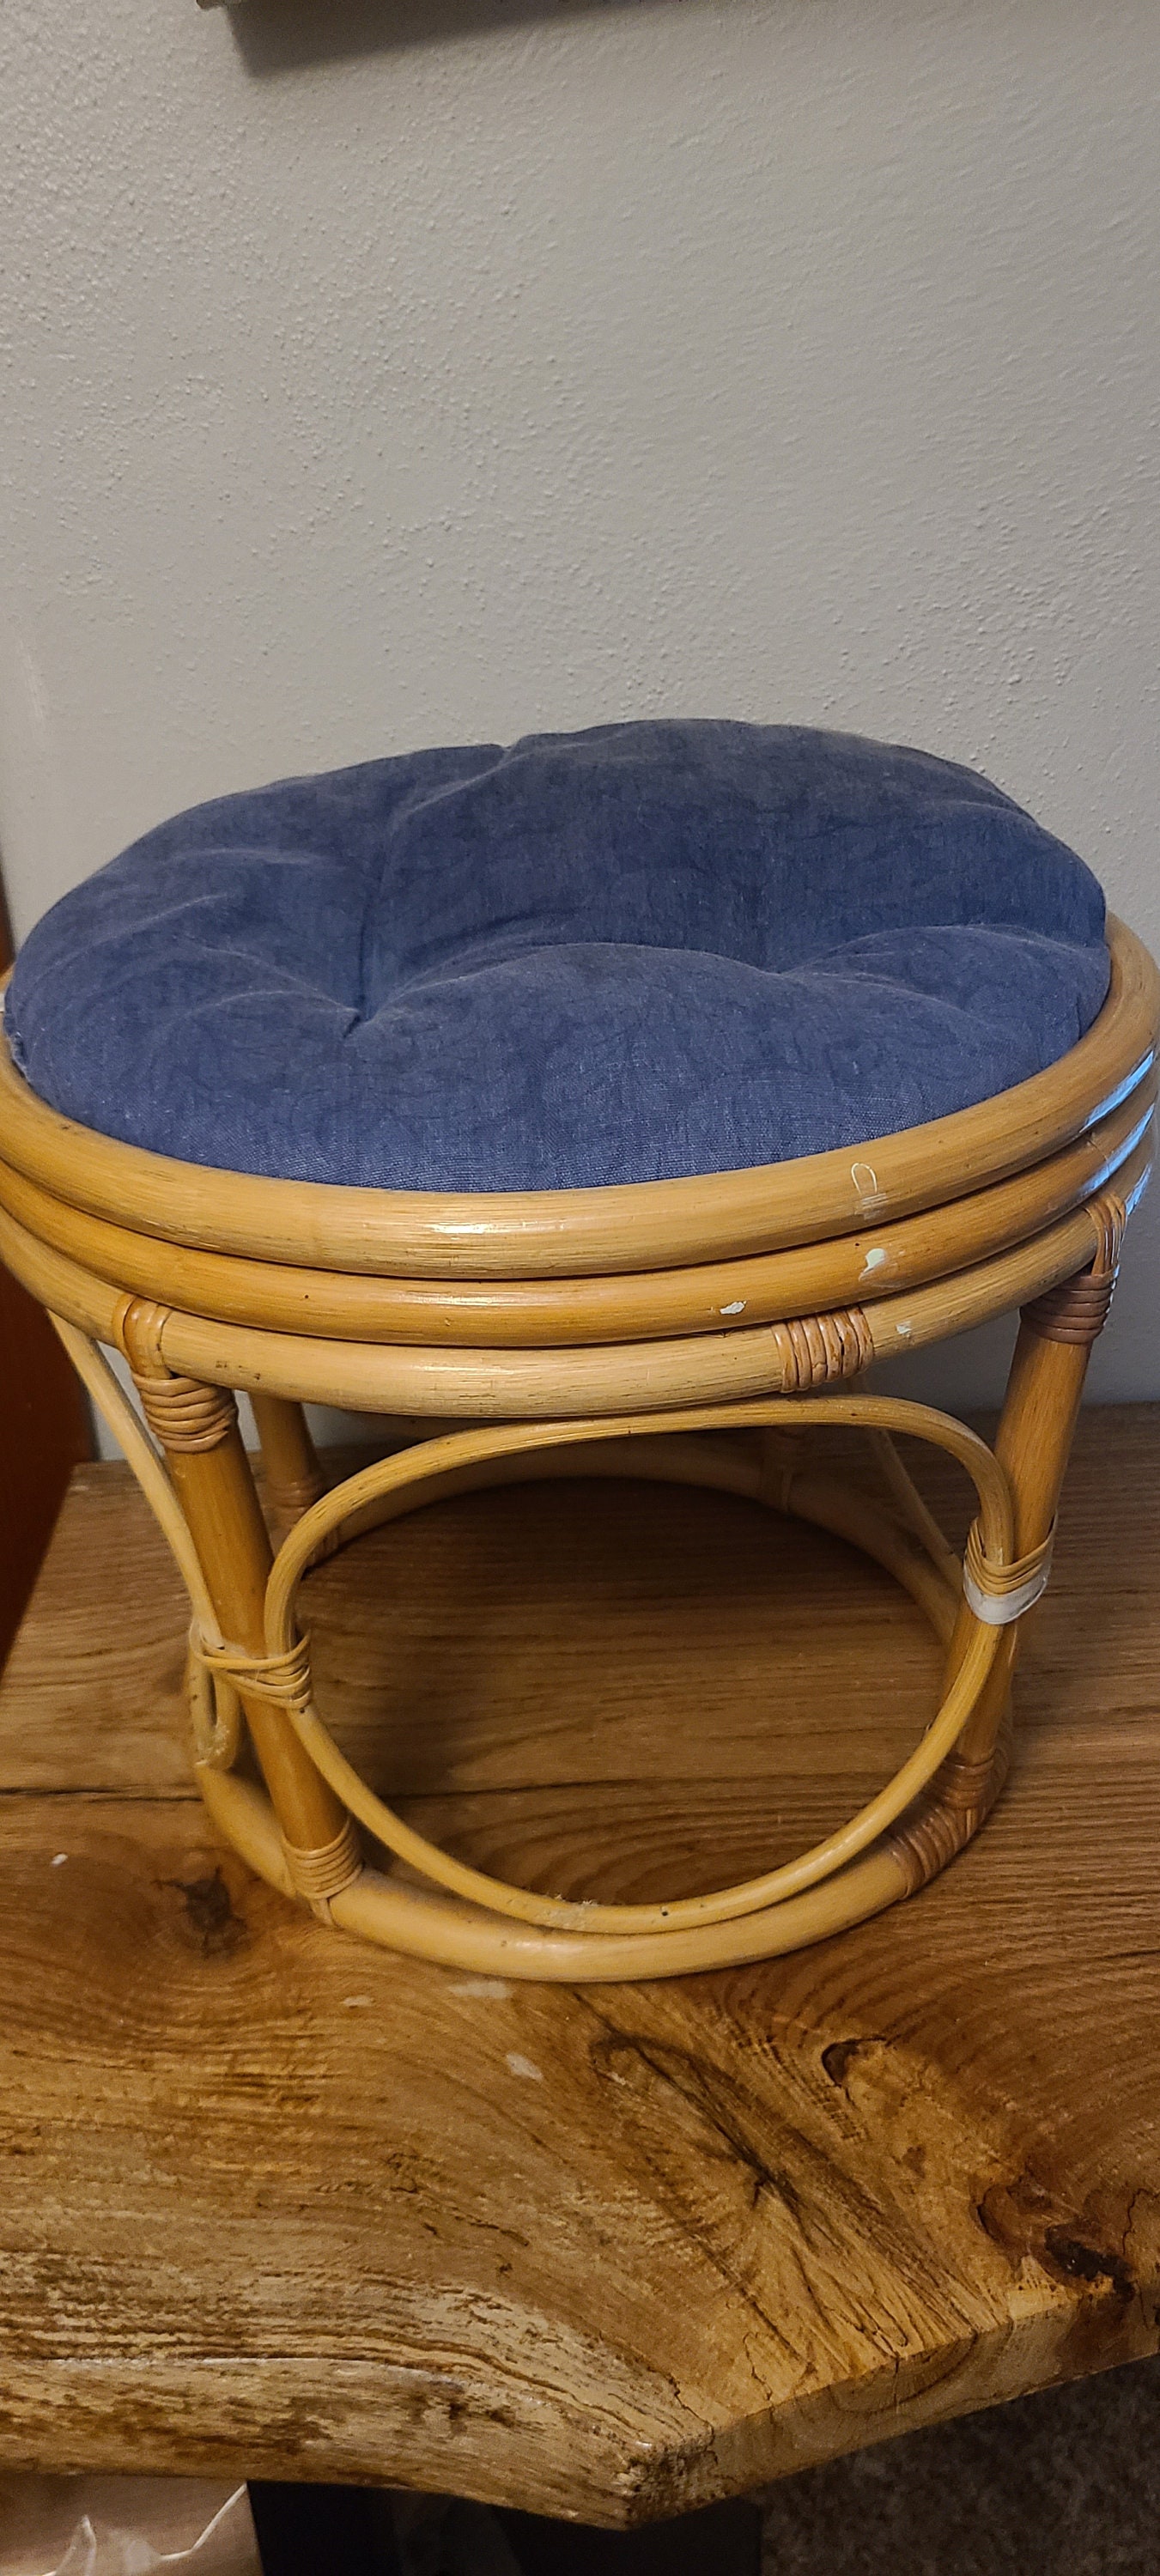 Vintage Round Rattan Foot Stool With Black Cushion